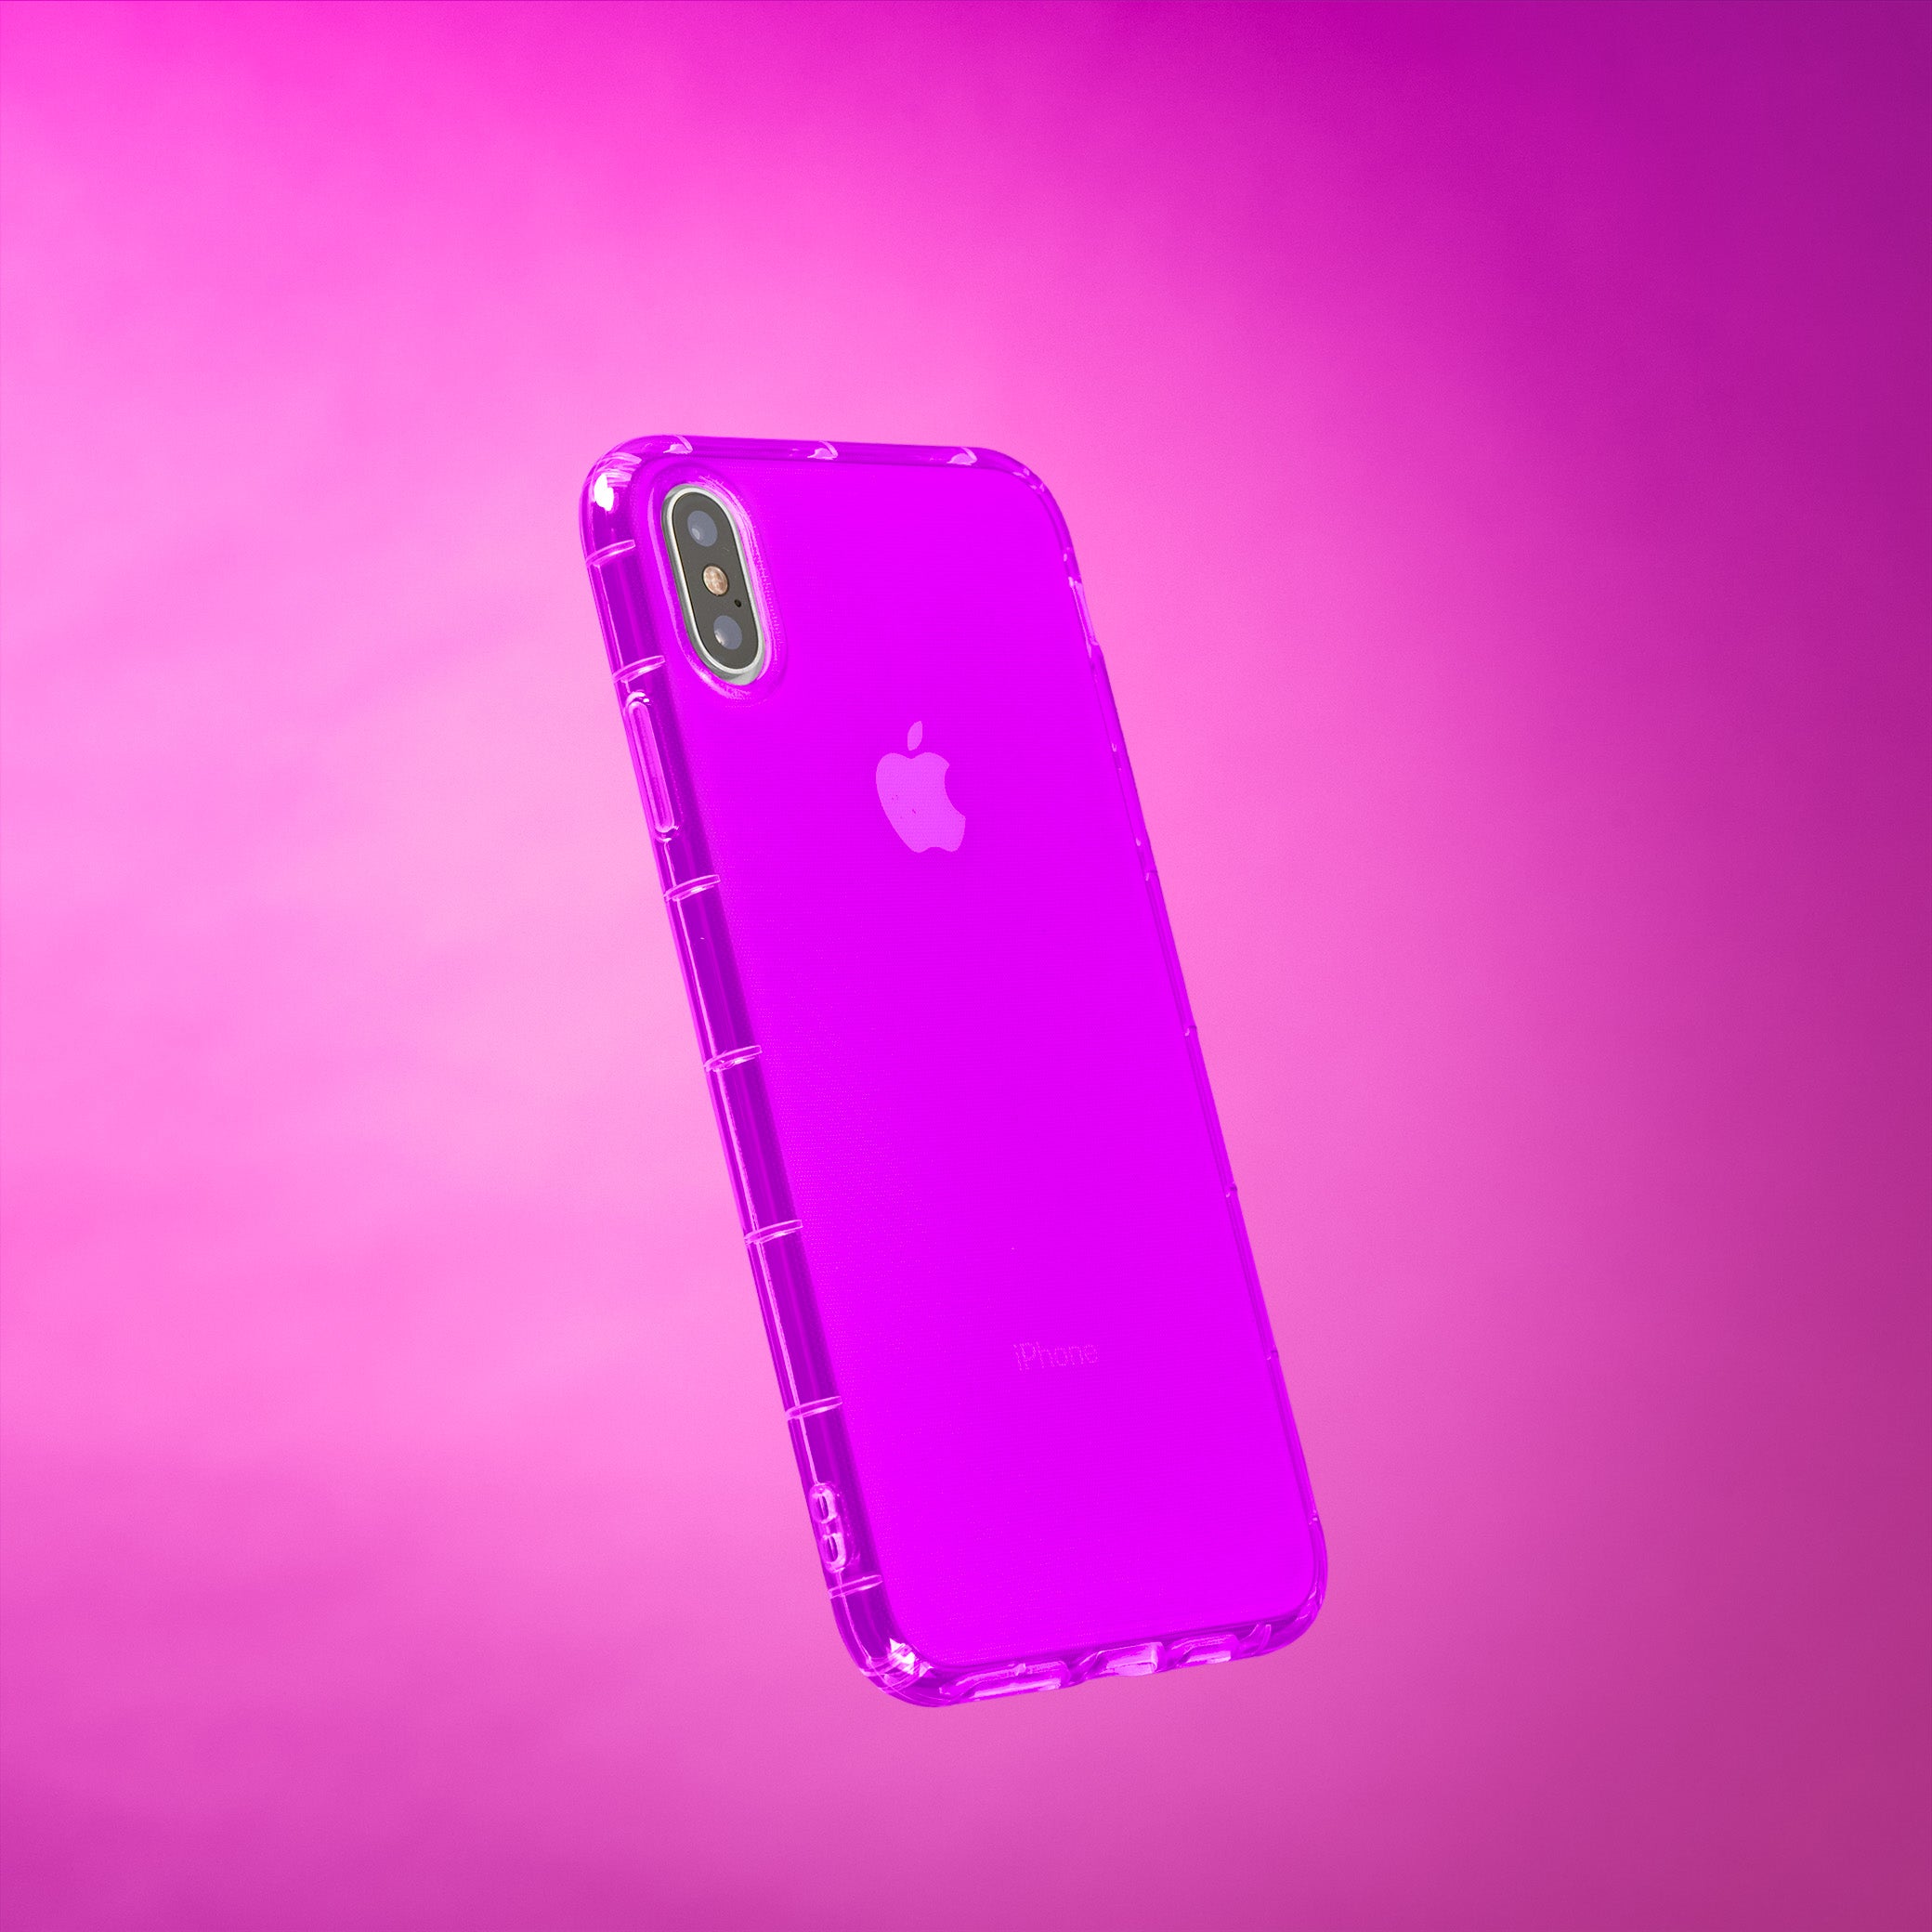 Highlighter Case for iPhone Xs Max - Saturated Vivid Purple